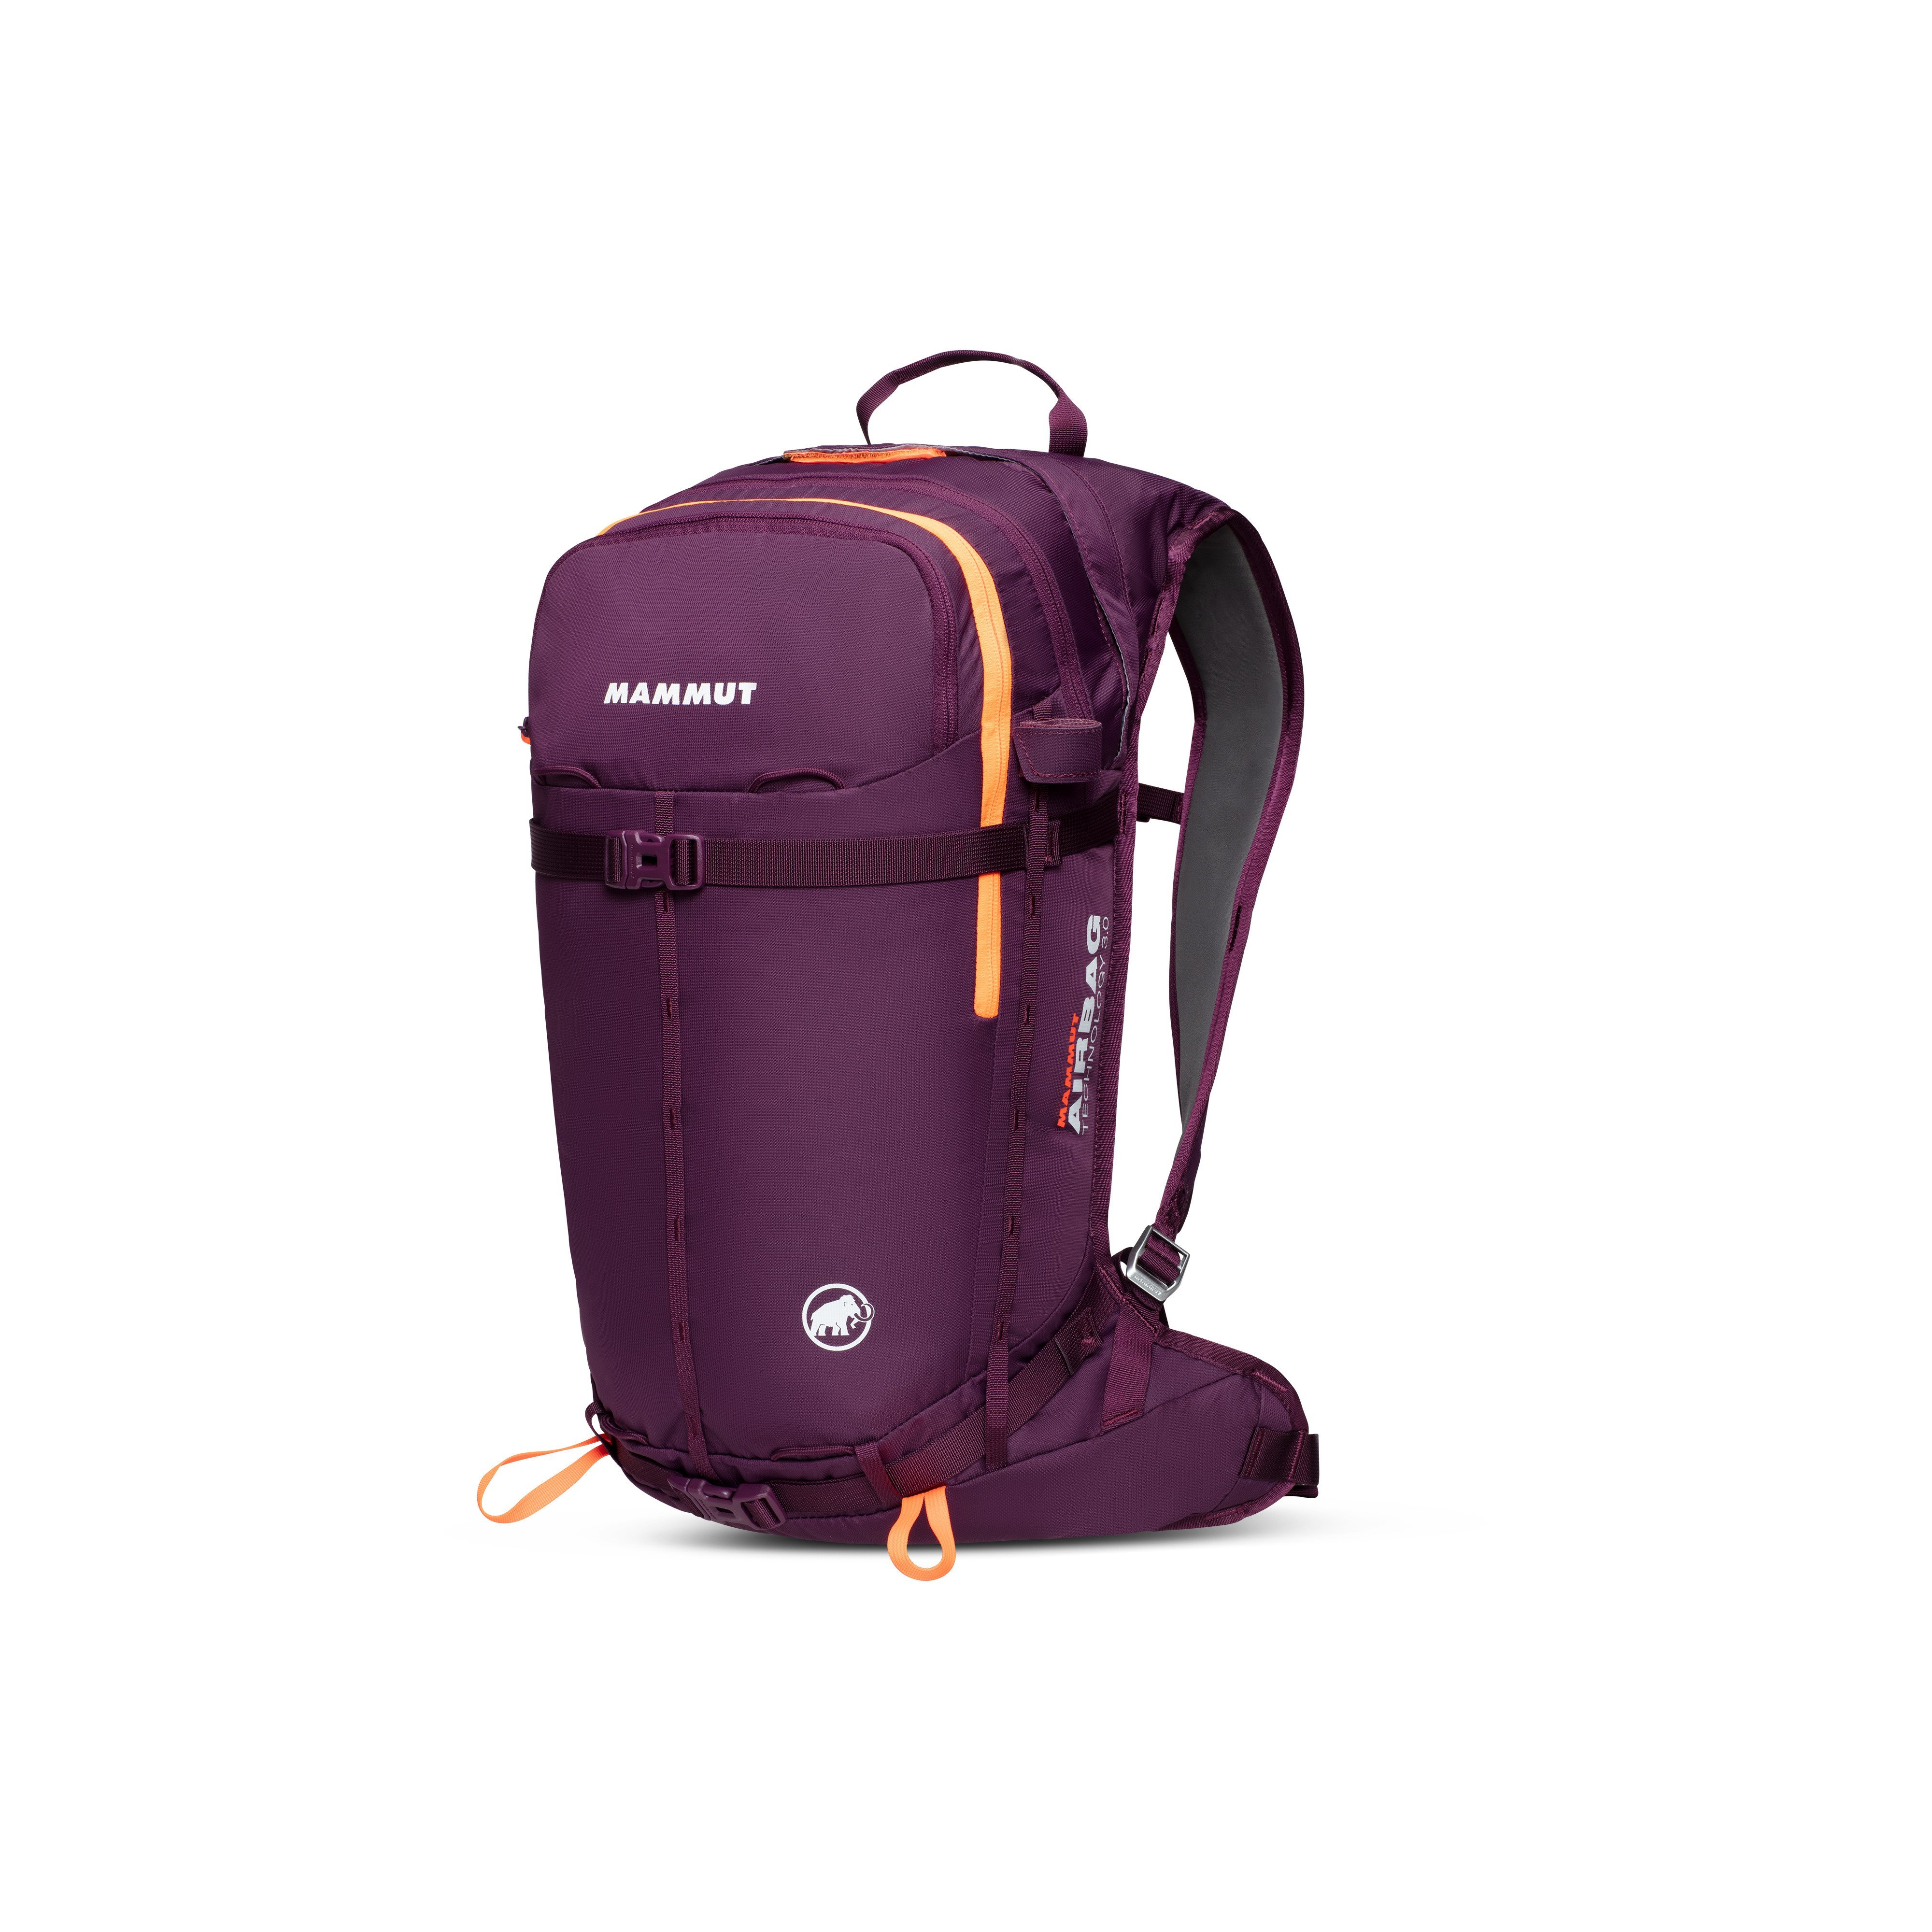 Flip Removable Airbag 3.0 - grape, 22 L product image